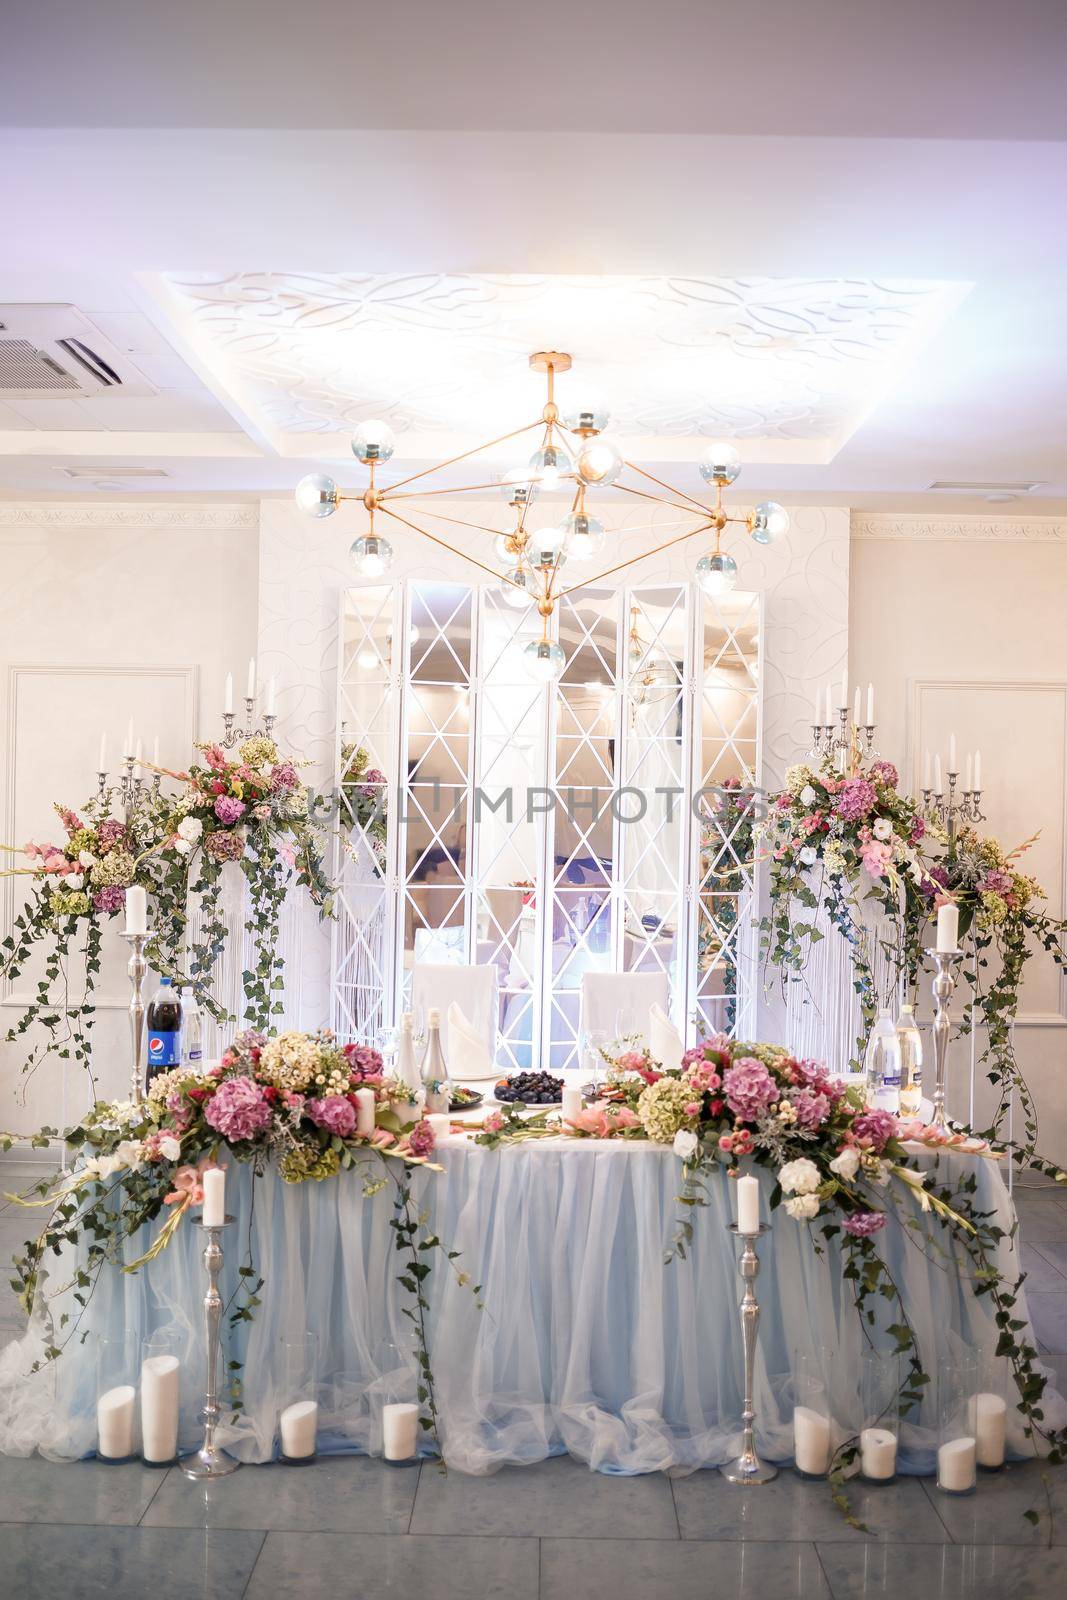 Wedding decor made of flowers and fabric. Beautiful decorations for newlyweds on their wedding day by Dmitrytph